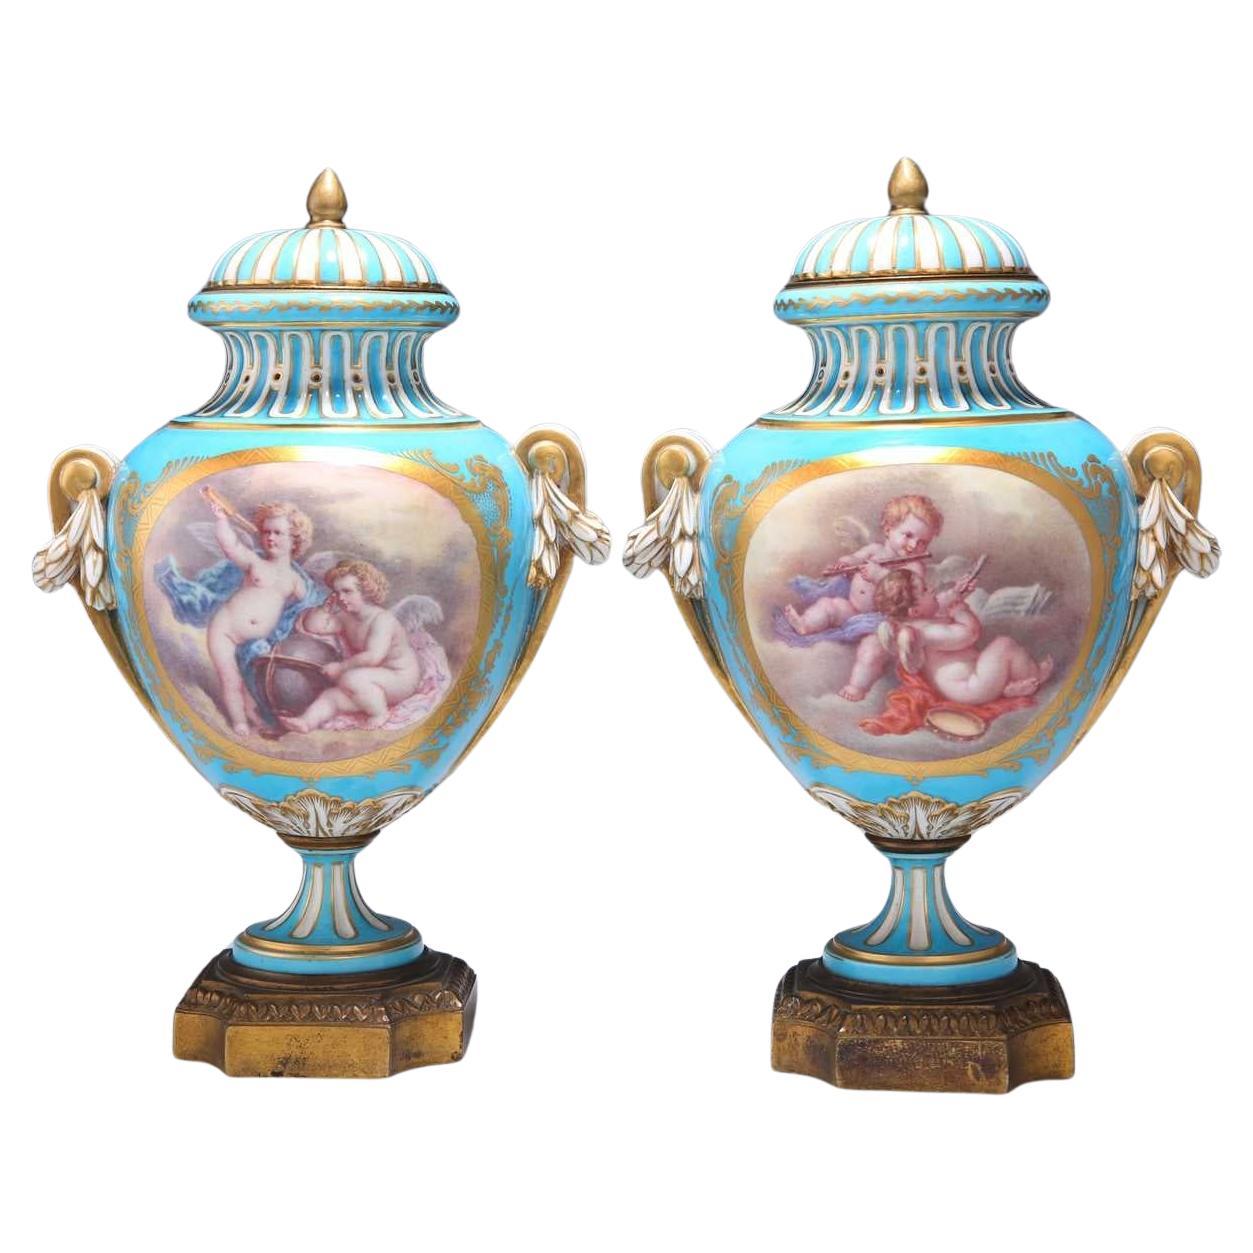 Pair of Sevres Style Bleu Celeste Hand-Painted Putti Lidded Vases 19th Century